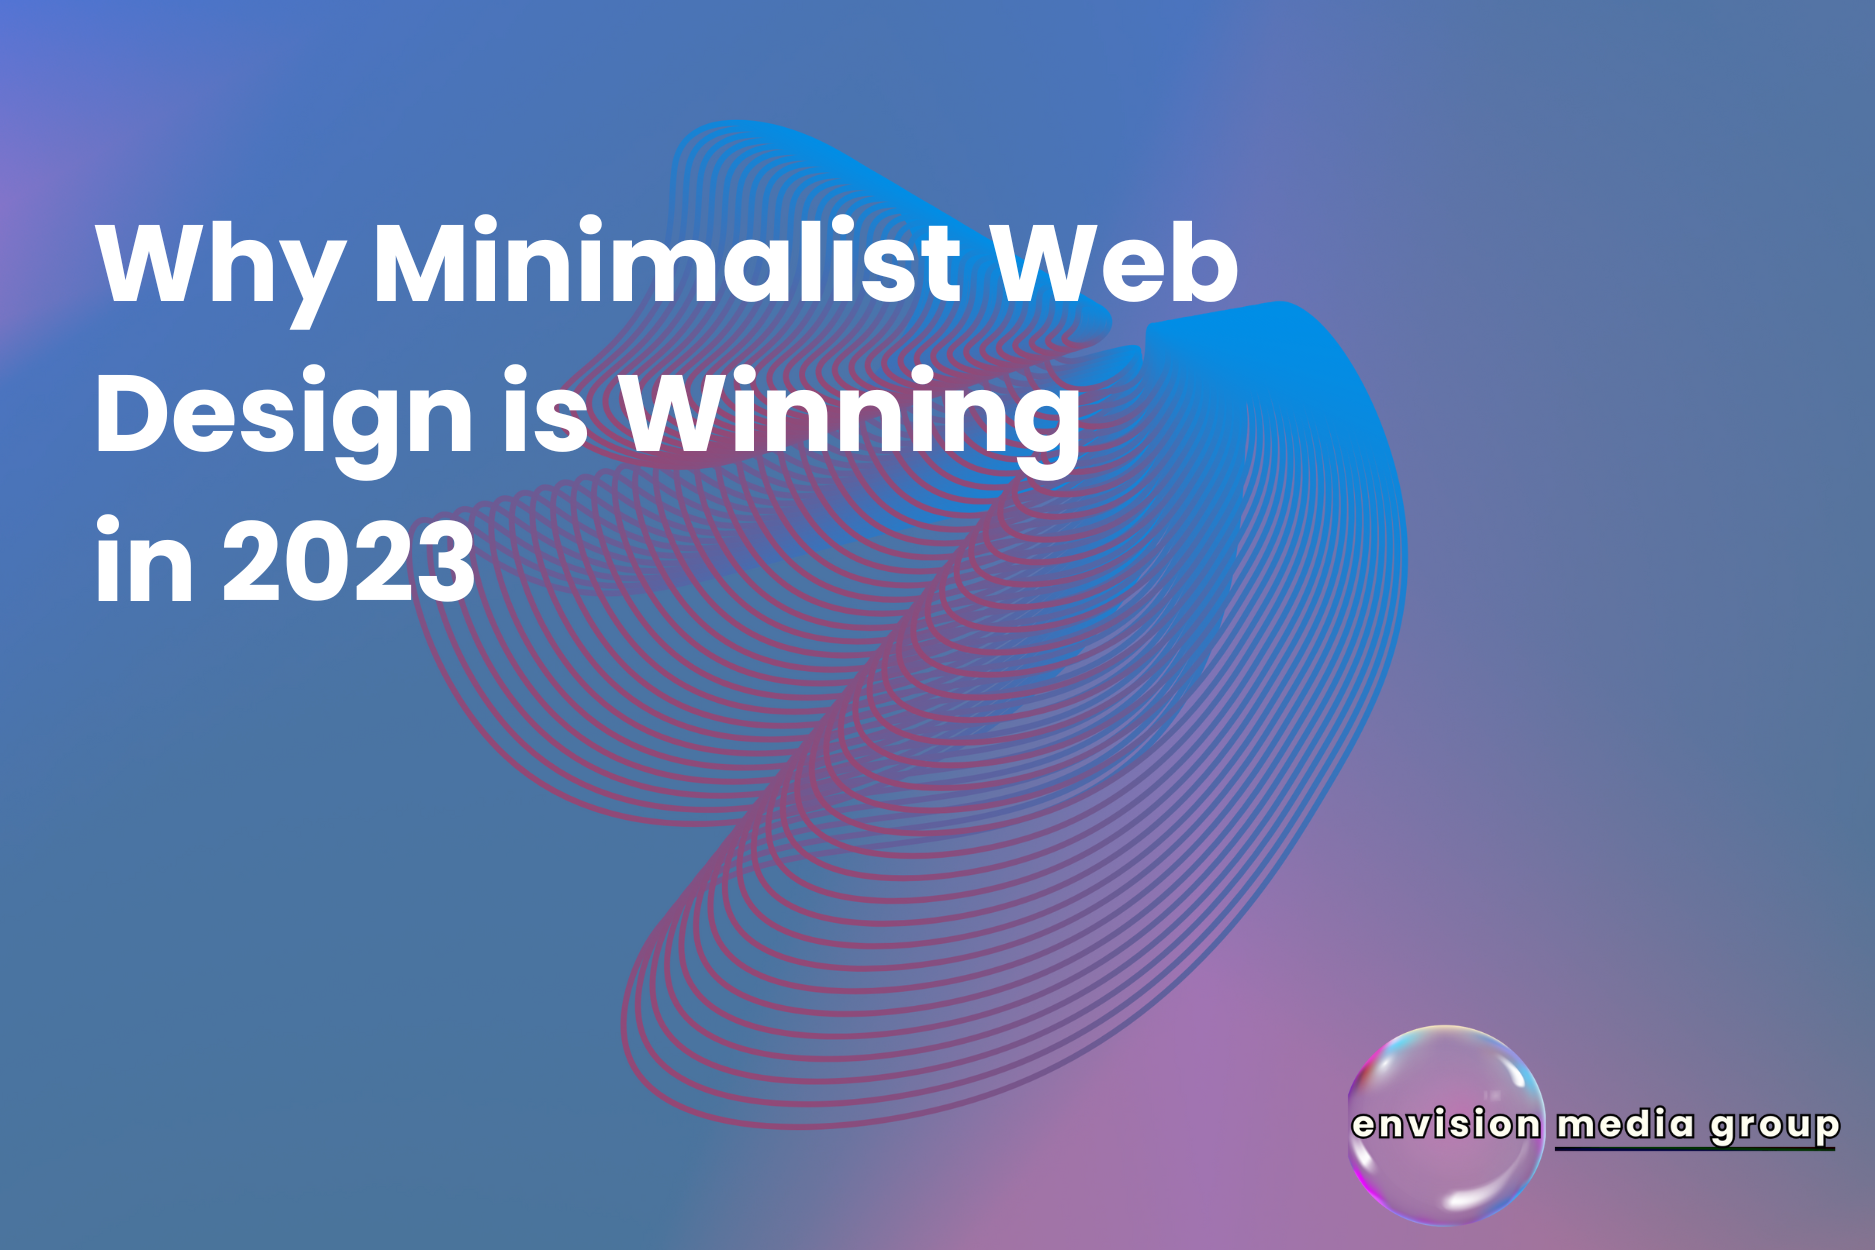 Header image with the title 'Why Minimalist Web Design is Winning in 2023' on a minimalist background